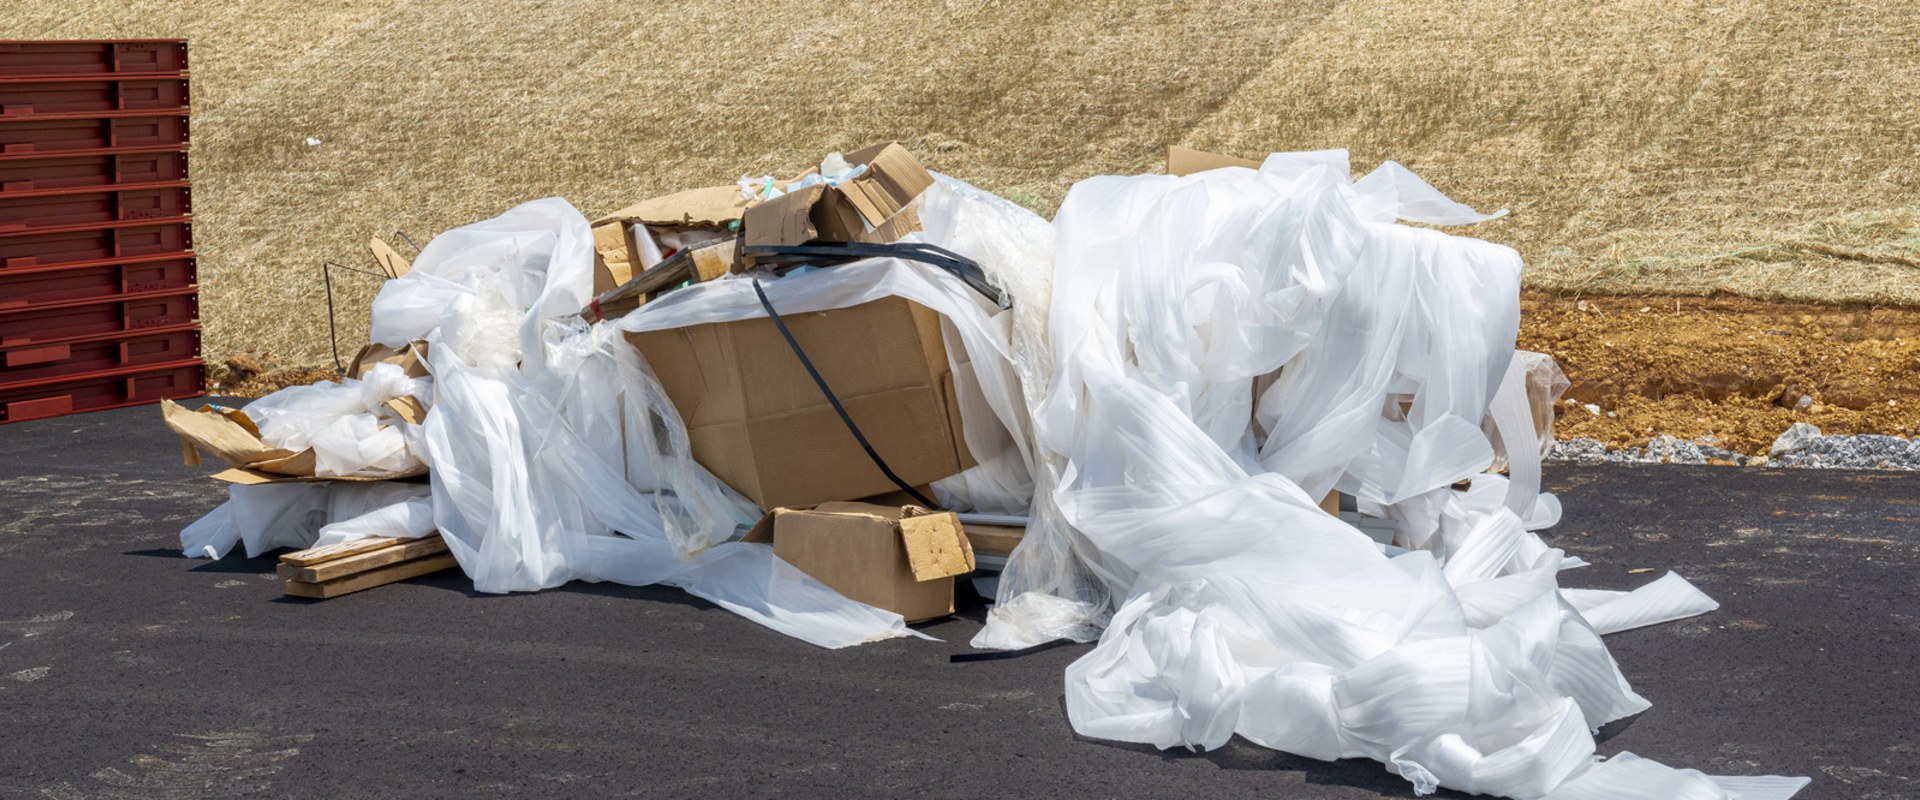 Make Your Home Stand Out: The Role Of Junk Removal And Home Staging In Boise's Properties